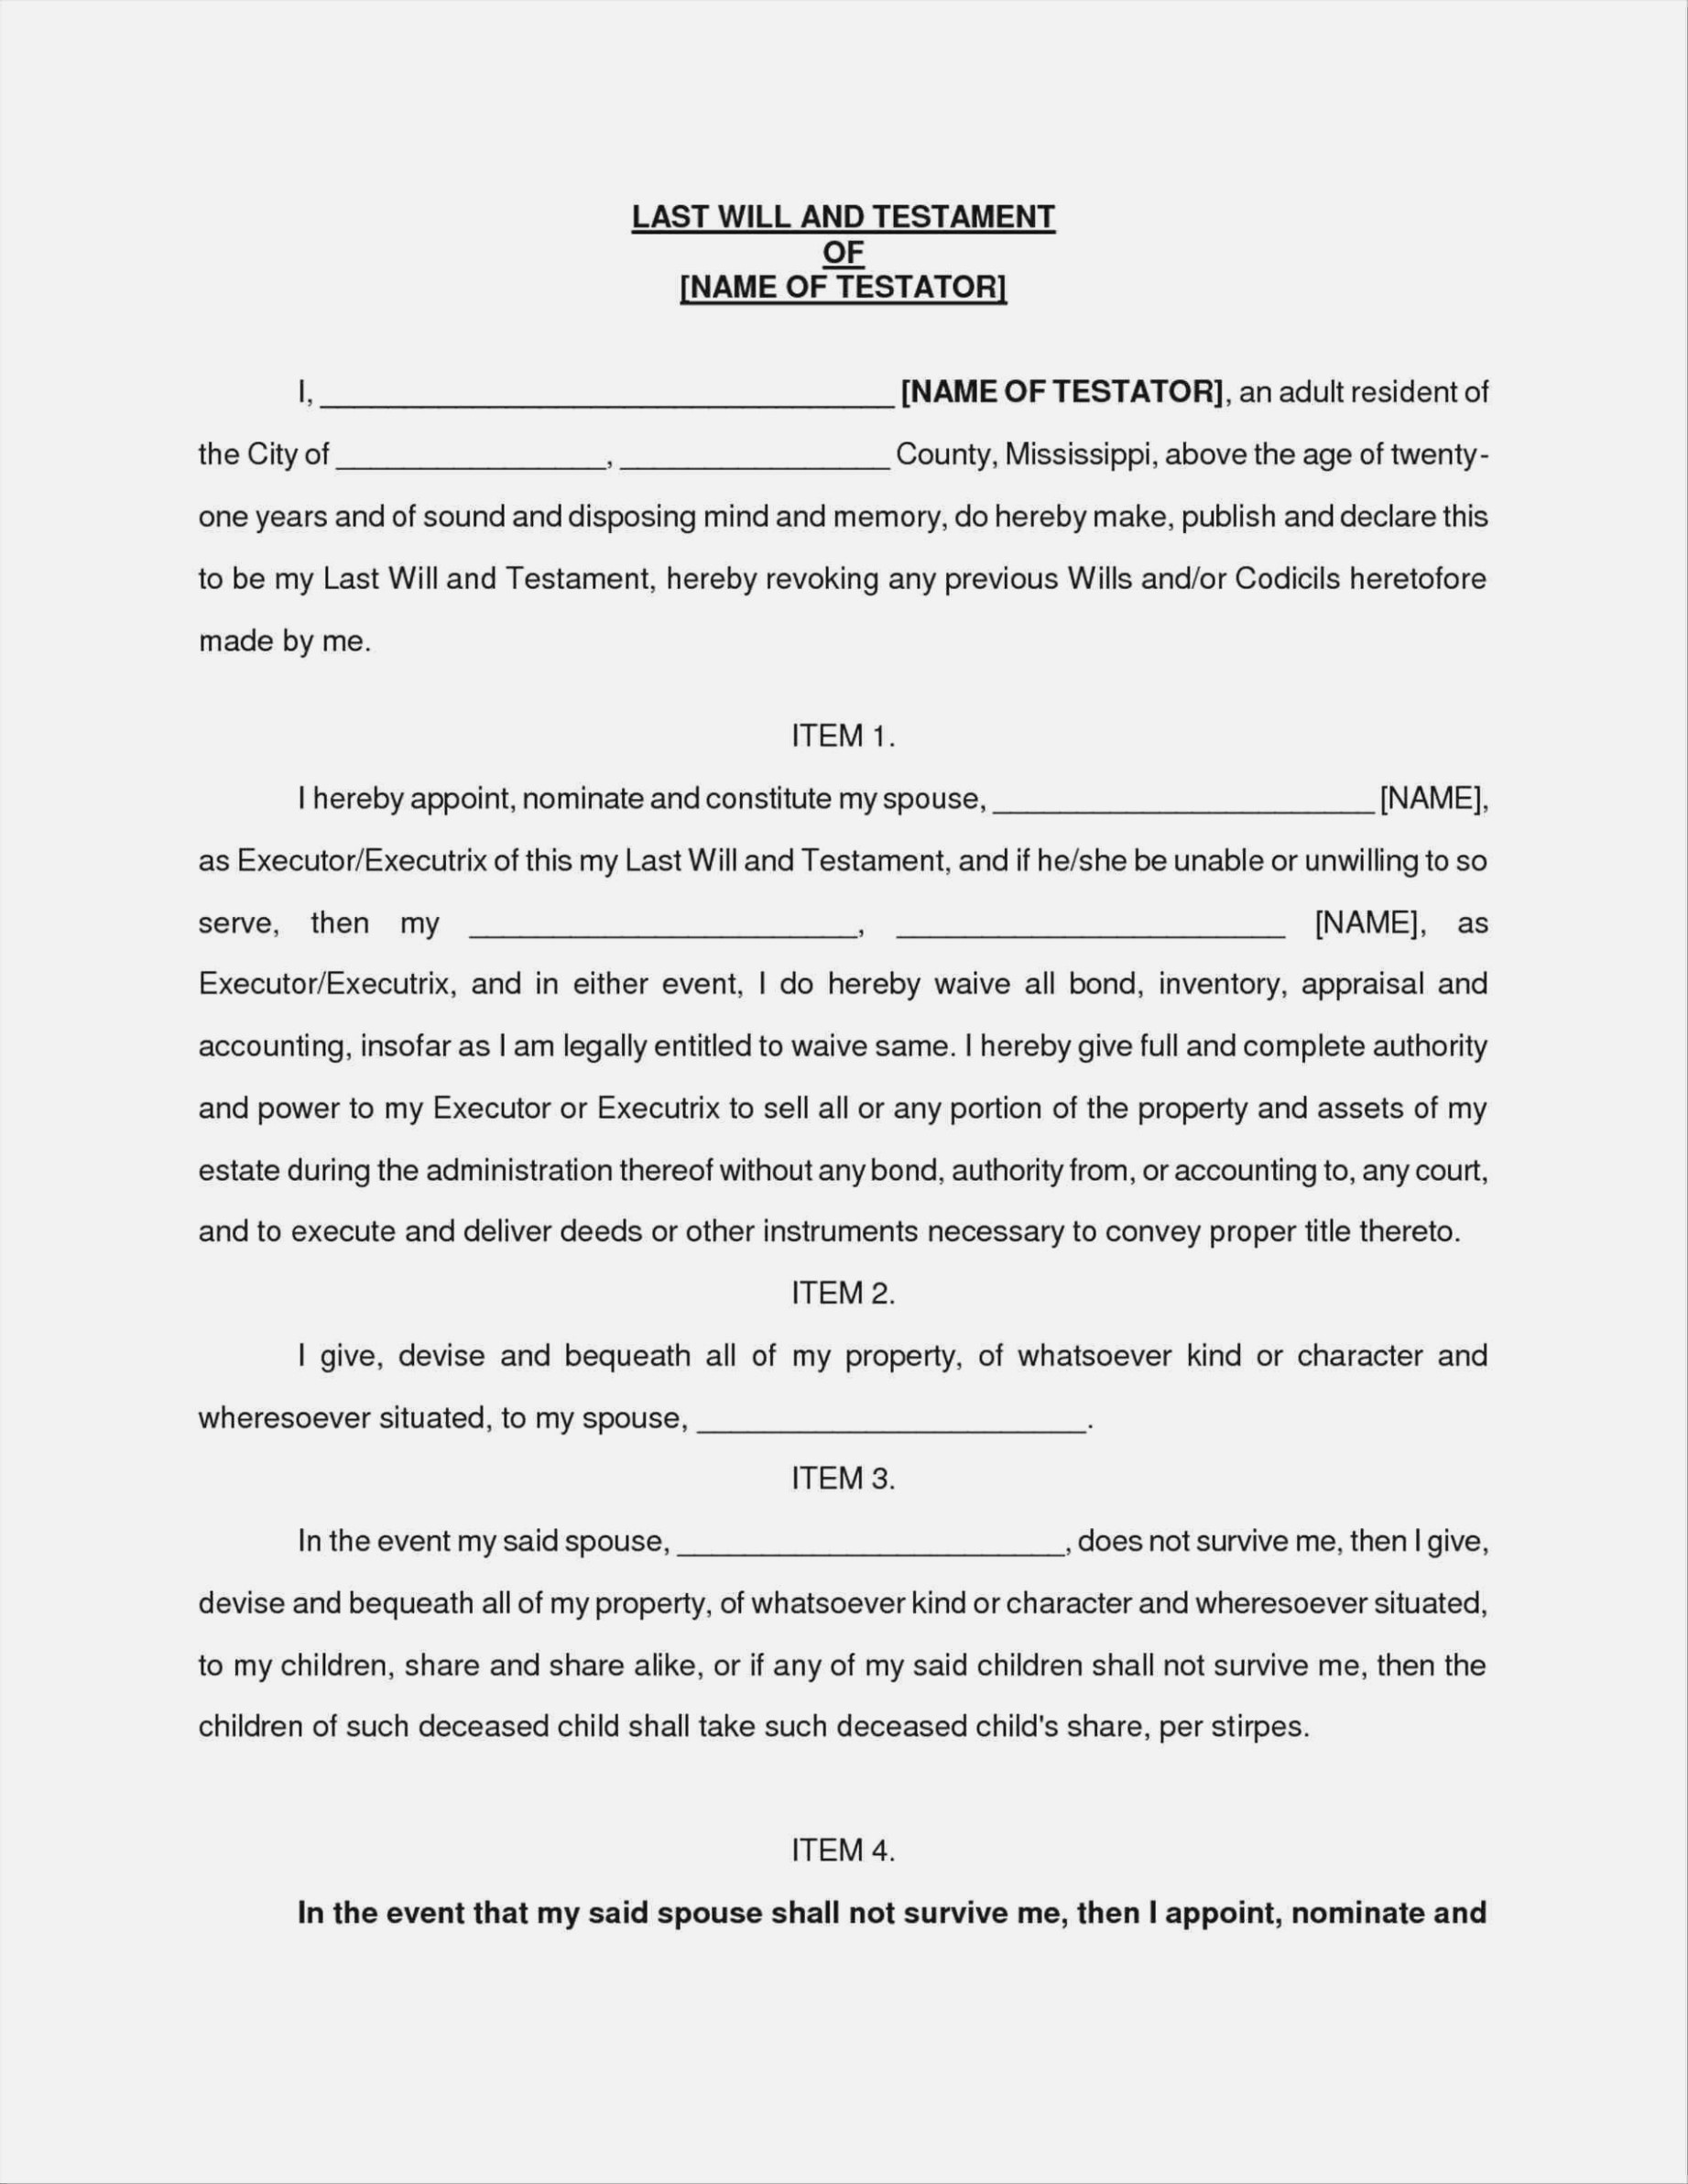 Last Will And Testament Form – Seatle.davidjoel – The Invoice And - Free Printable Last Will And Testament Blank Forms